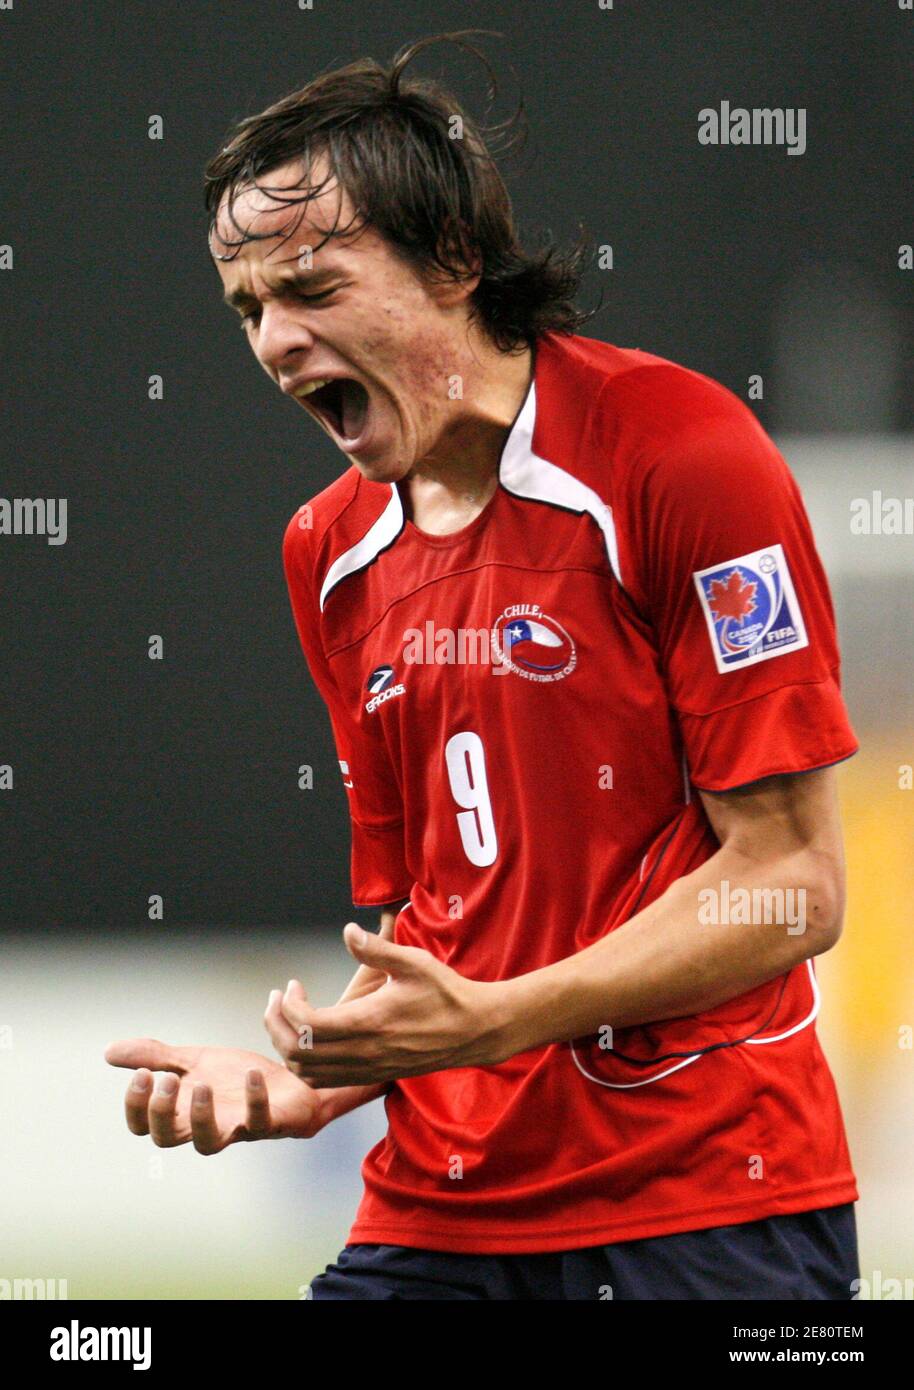 Chile's Nicolas Medina reacts during their quarterfinal match against  Nigeria at the FIFA U-20 World Cup soccer tournament in Montreal, Quebec,  July 15, 2007. REUTERS/Shaun Best (CANADA Fotografía de stock - Alamy